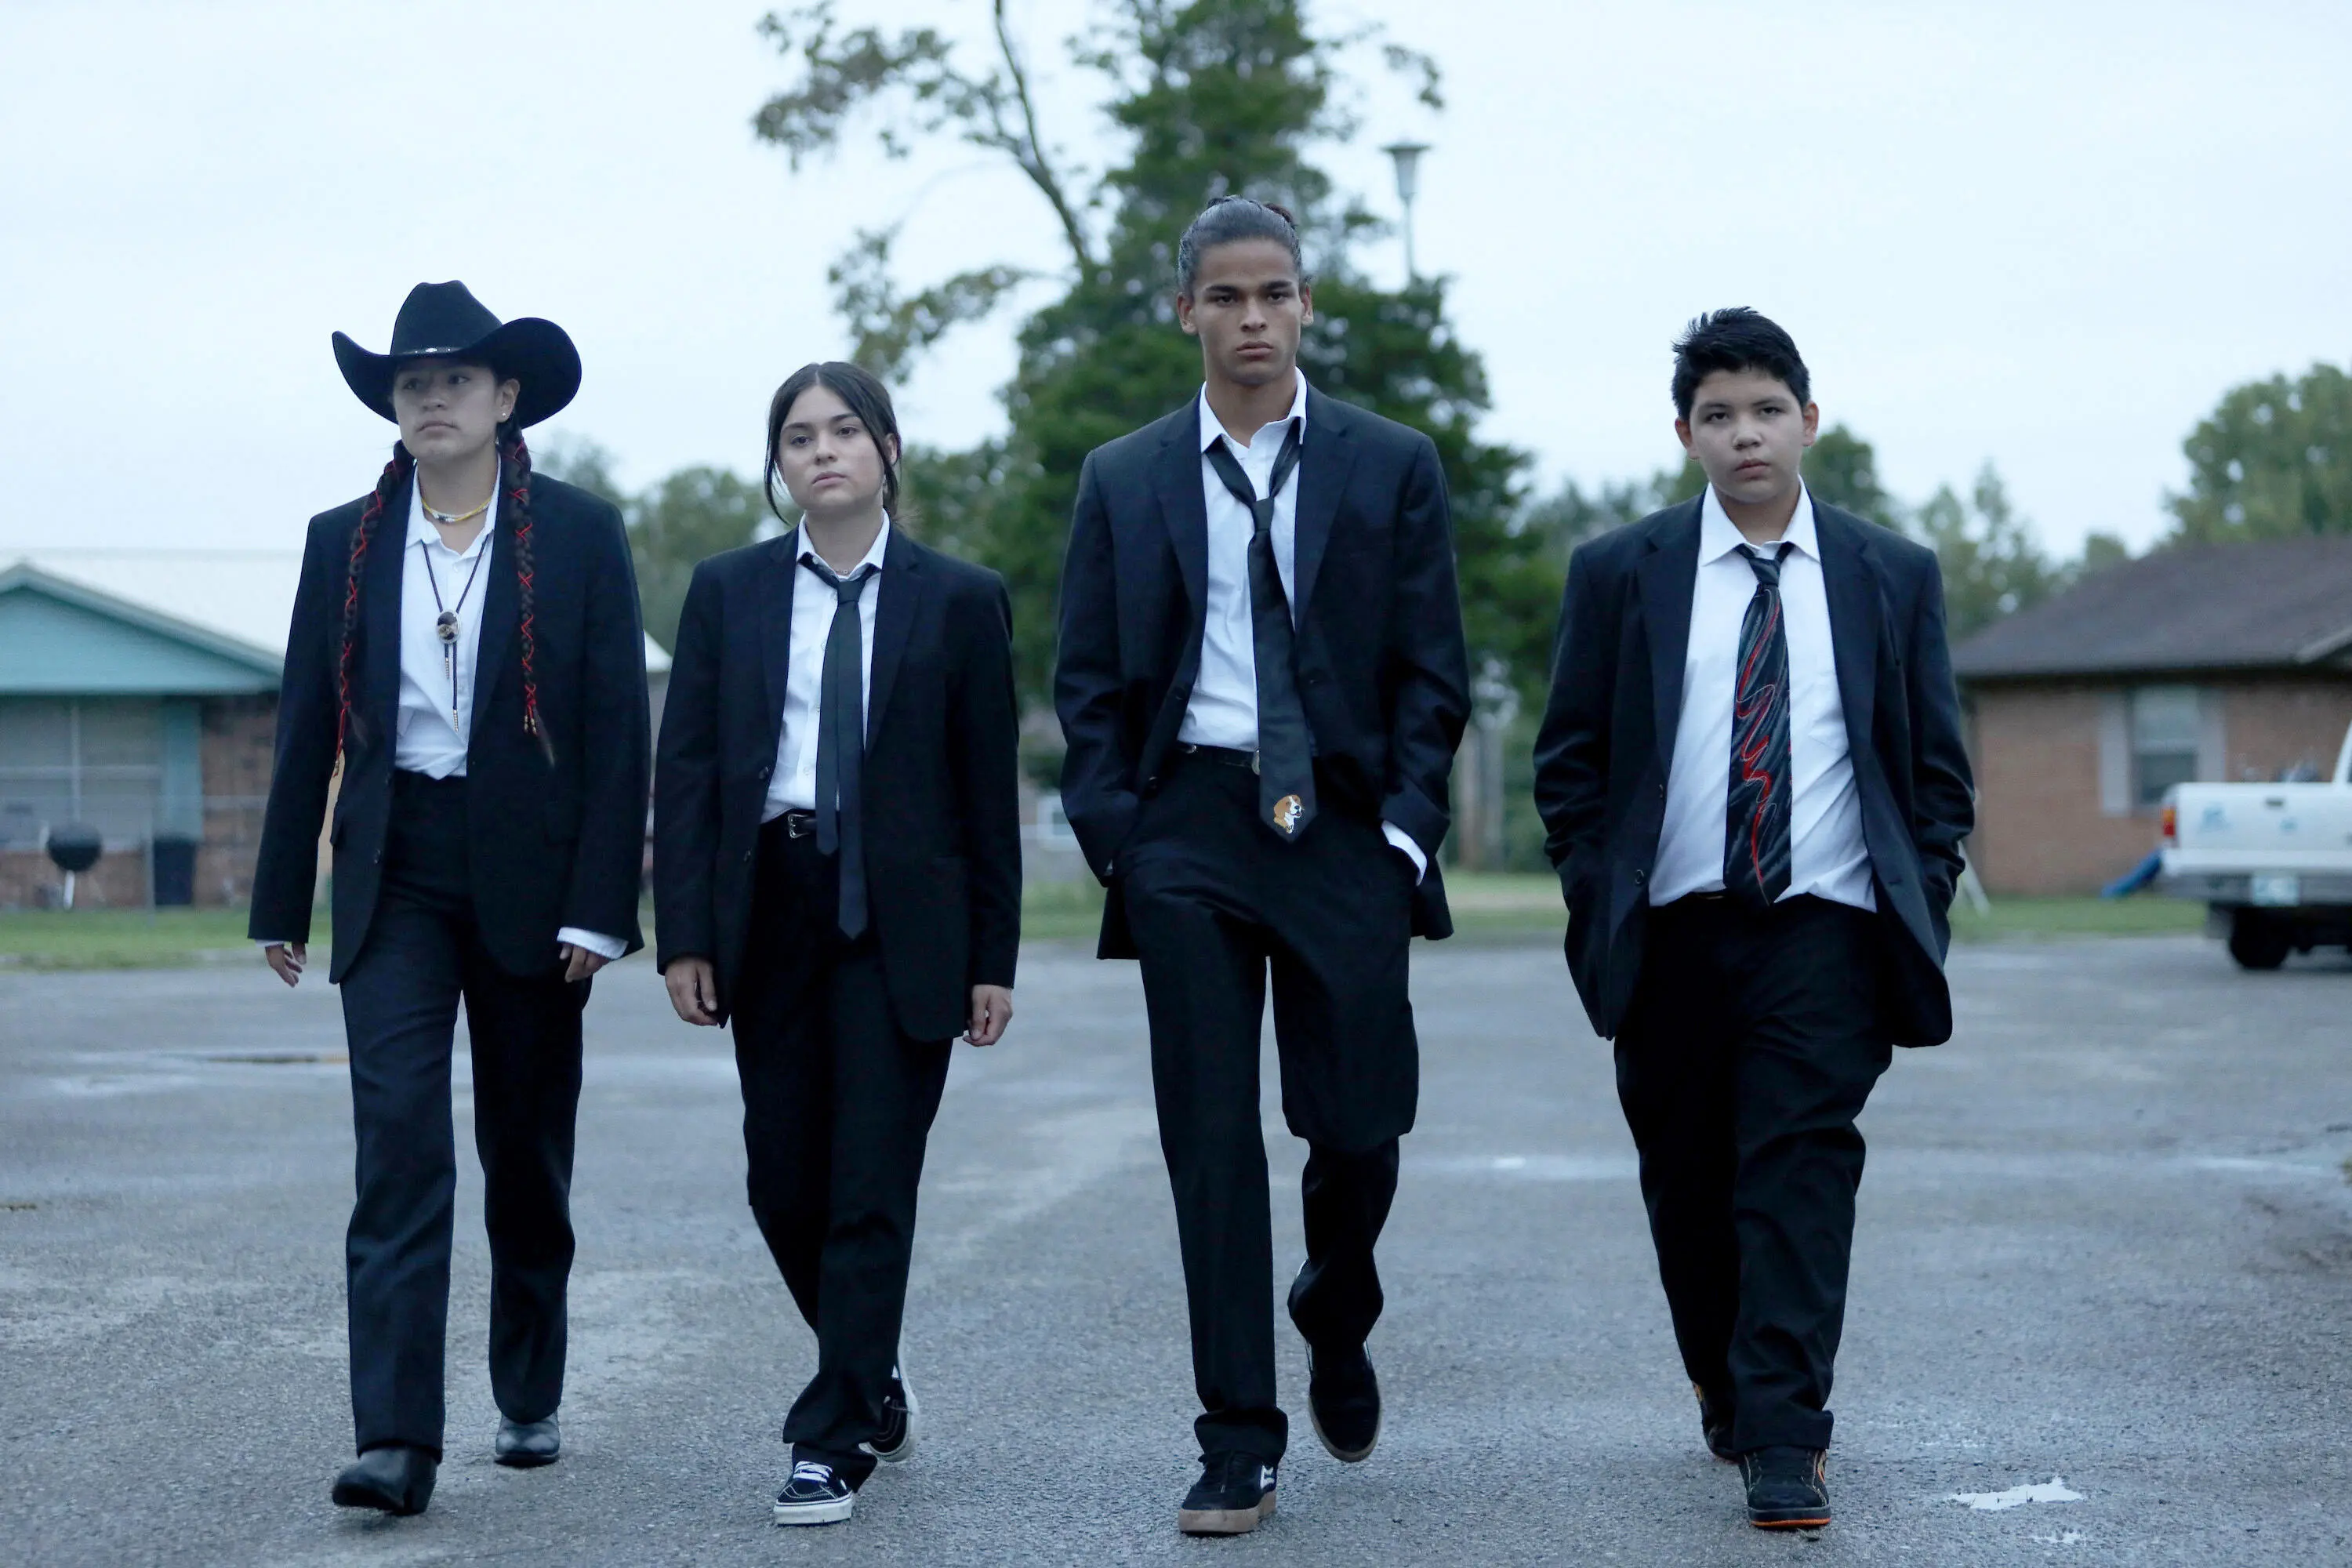 The main characters of Reservation Dogs walk shoulder to shoulder down a street in black and white suits. From left to right Willie Jack, wears a cowboy hat, bolo tie and red string in her two ponytails, Elora wears a black tie and her hair in a ponytail, Bear wears a black tie with an embroidered dog on the end and his hair in a bun, and Cheese wears a black tie with red and white swirls on the front.